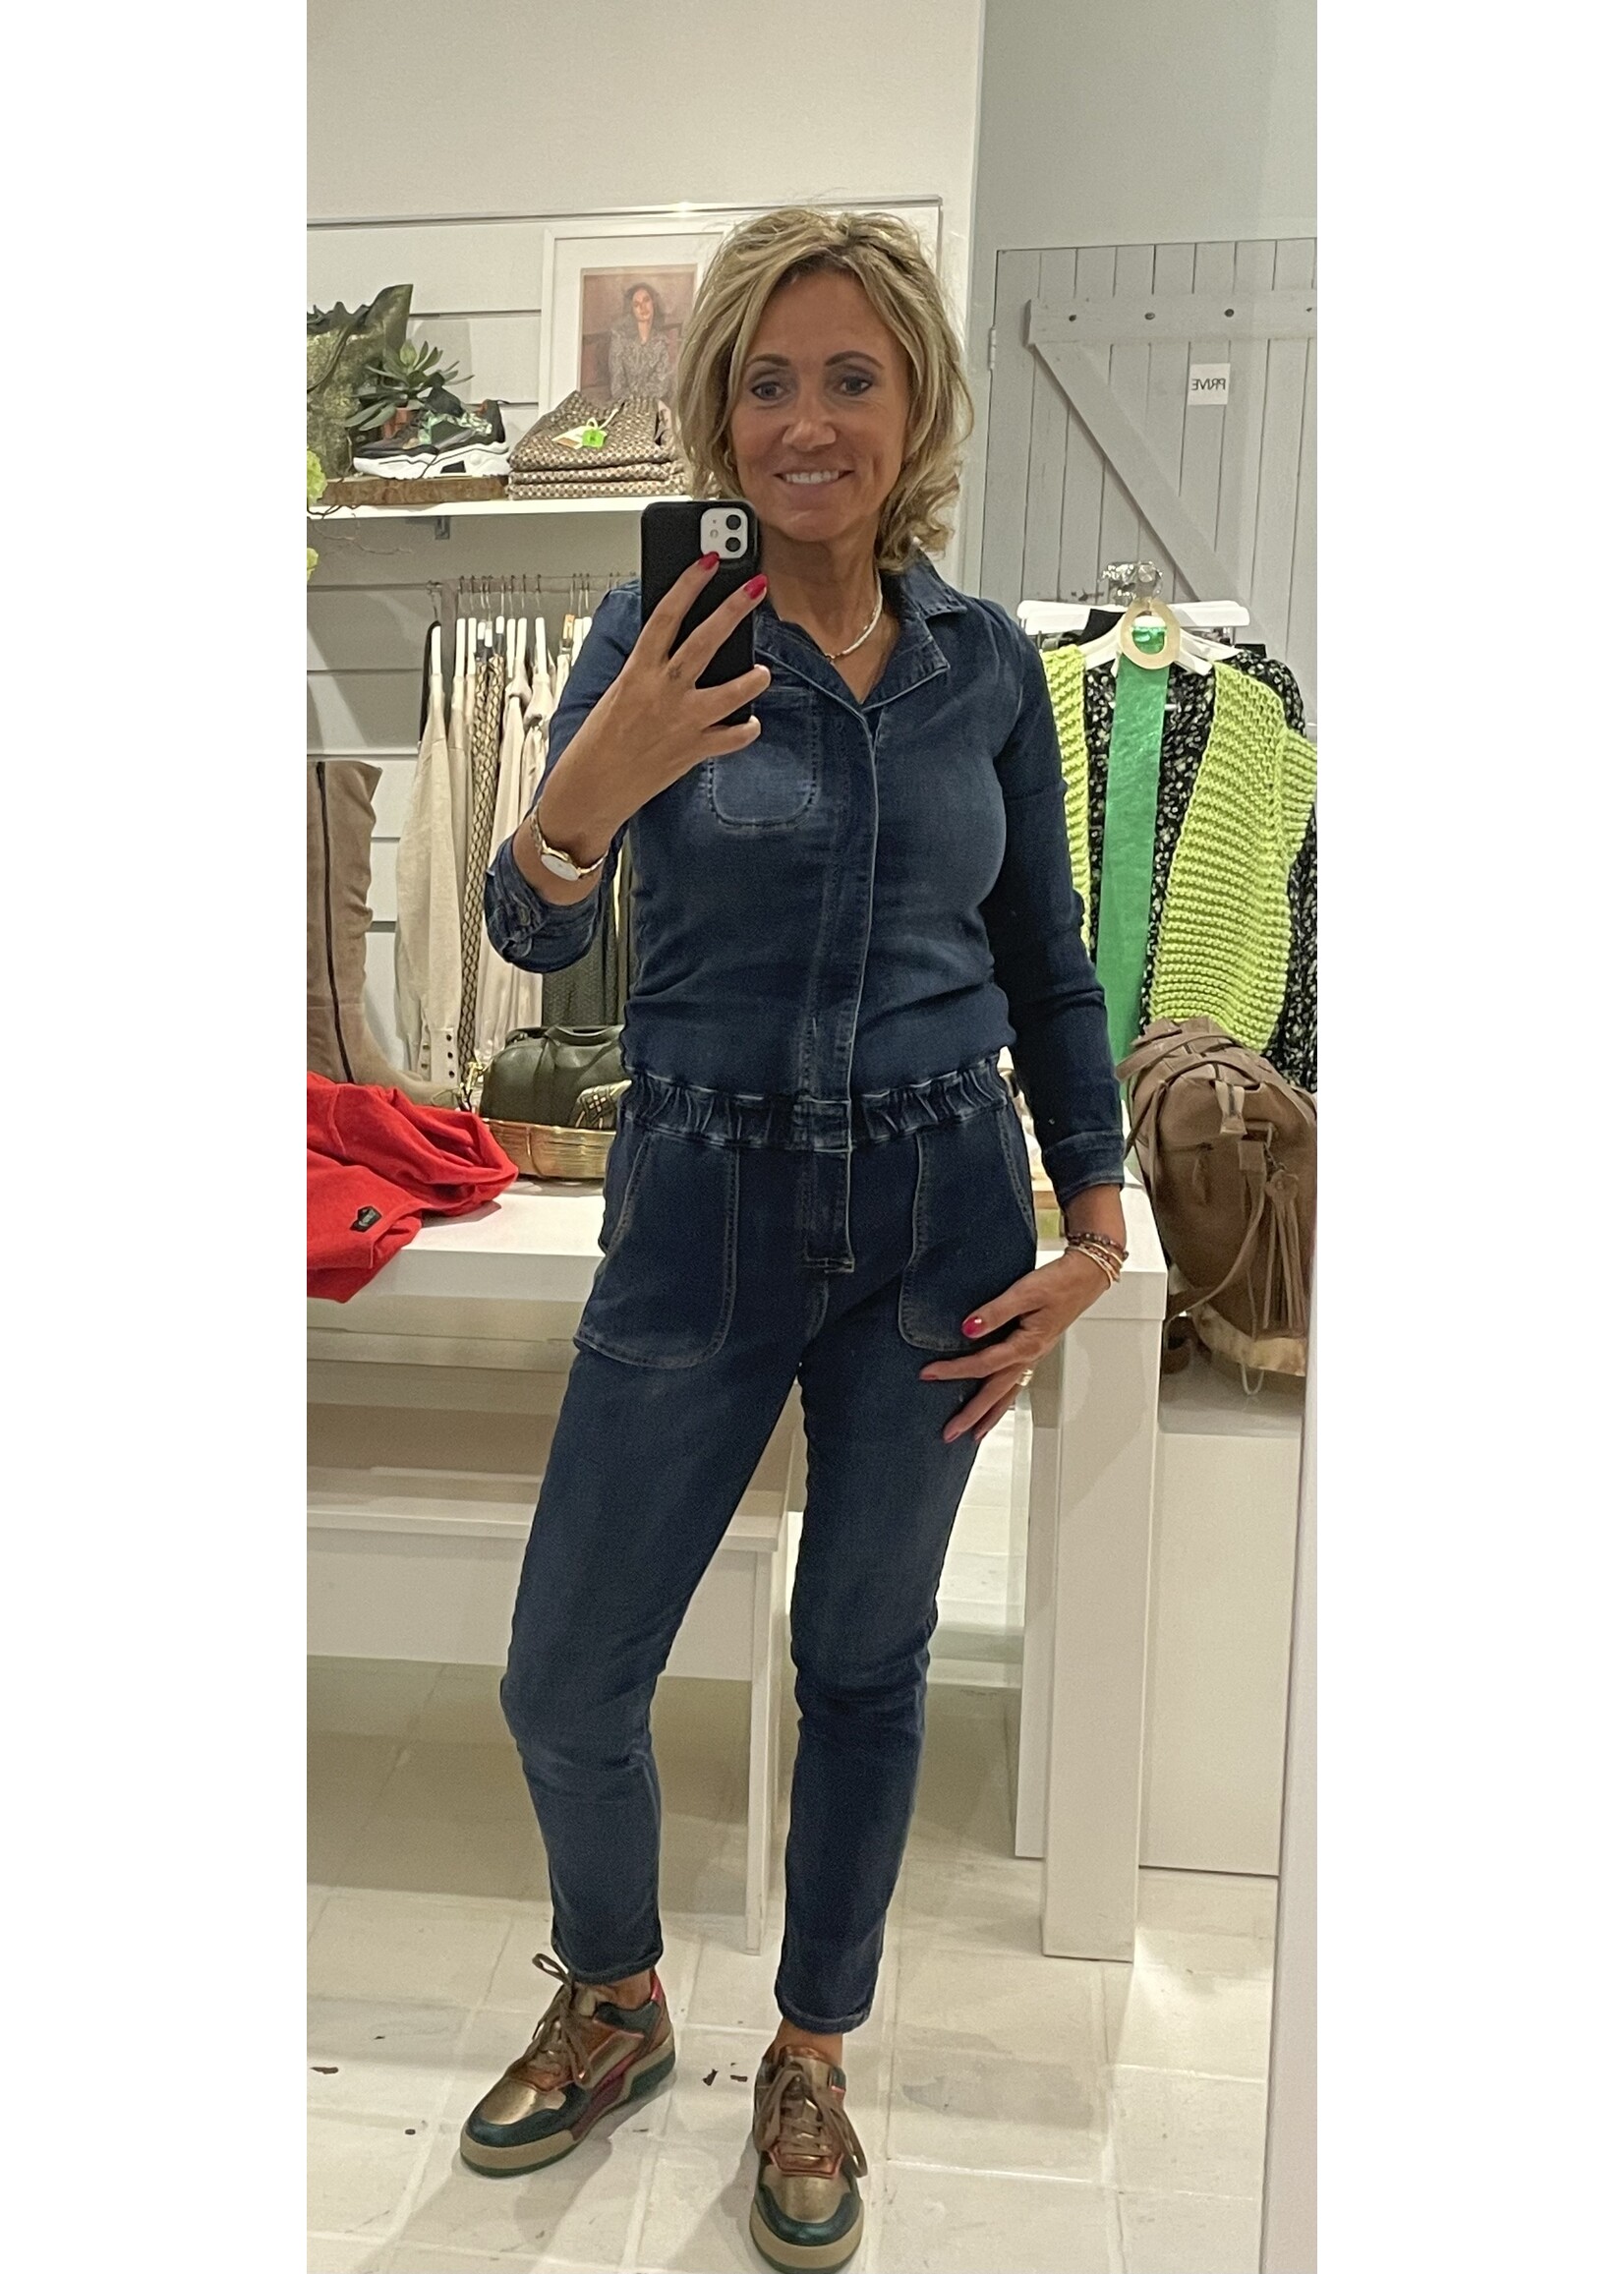 B-stylicious B-Stylicious - Hanna - Jeans jumpsuit - Jeans